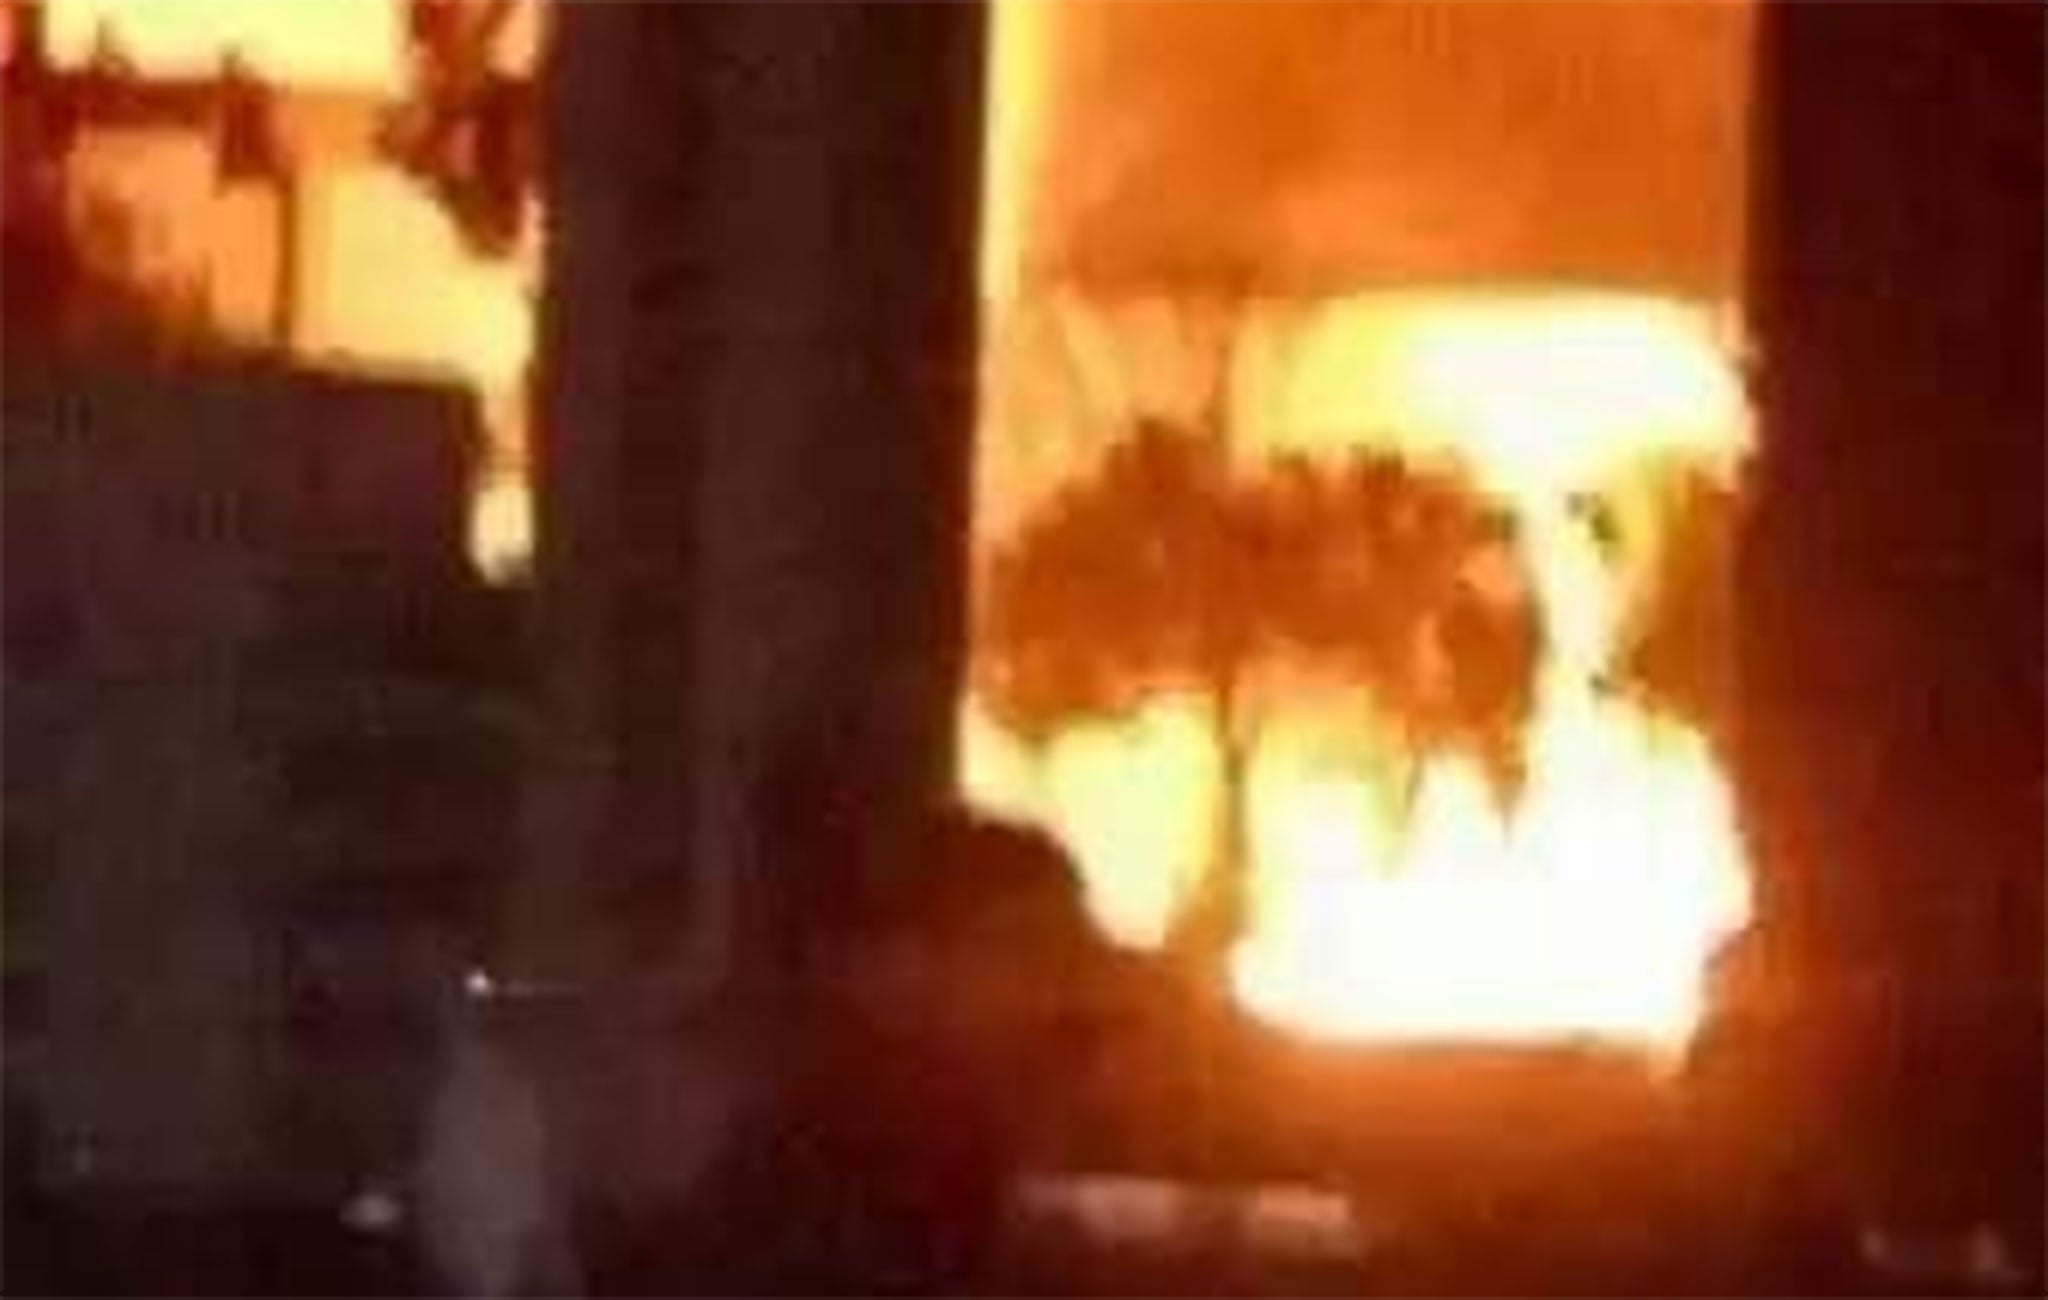 An image purporting to show flames at the chemical plant, posted to Weibo